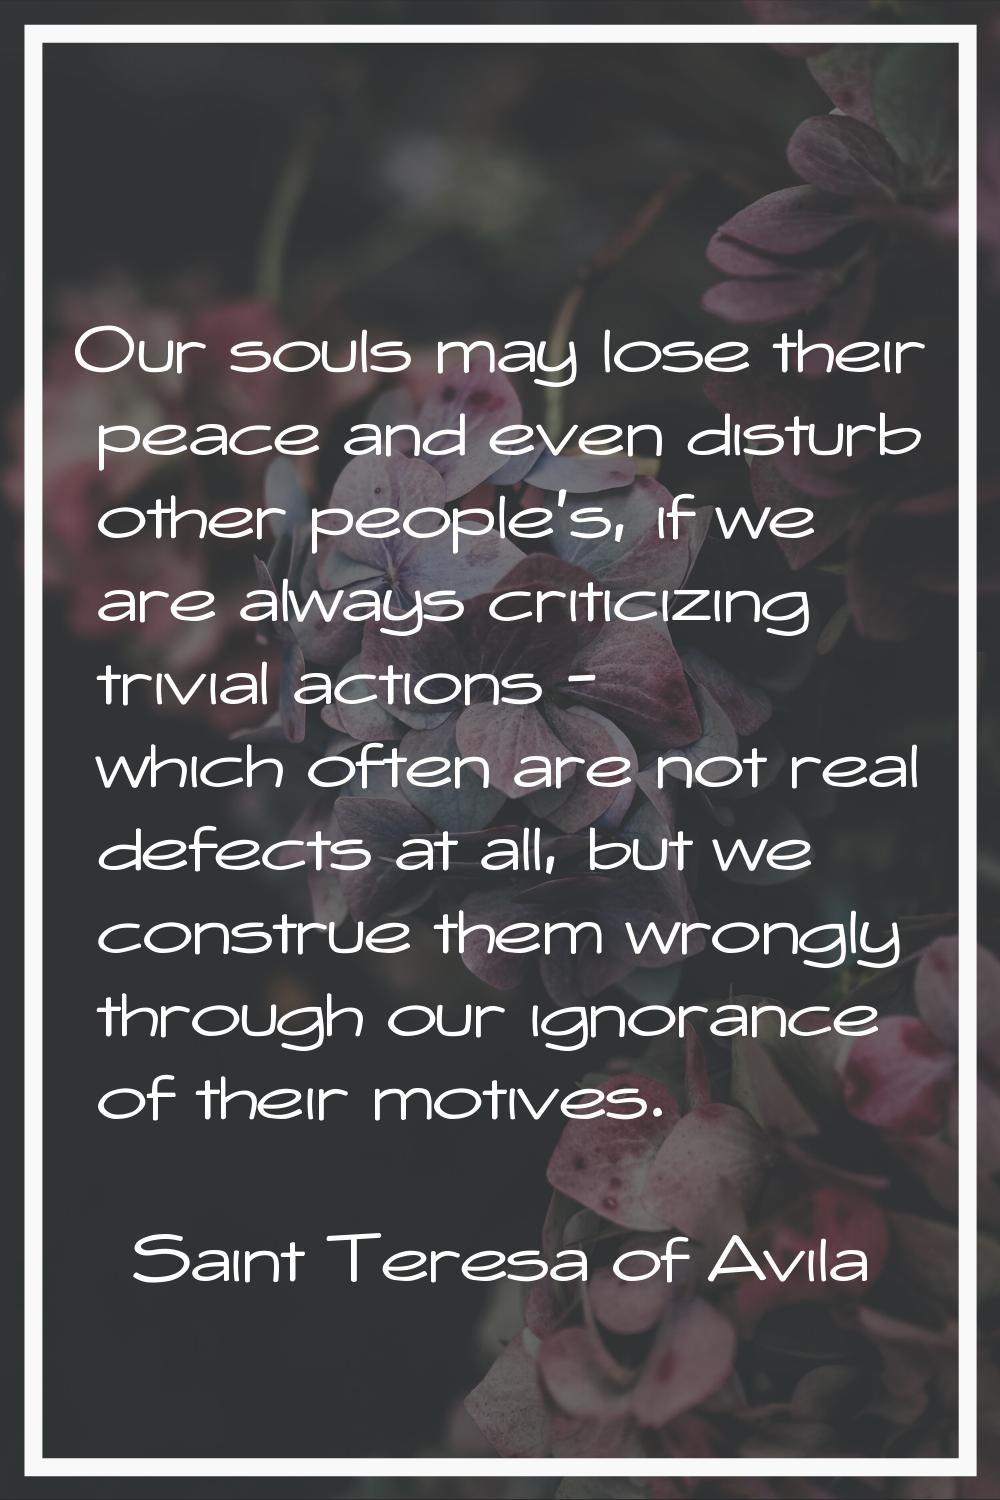 Our souls may lose their peace and even disturb other people's, if we are always criticizing trivia